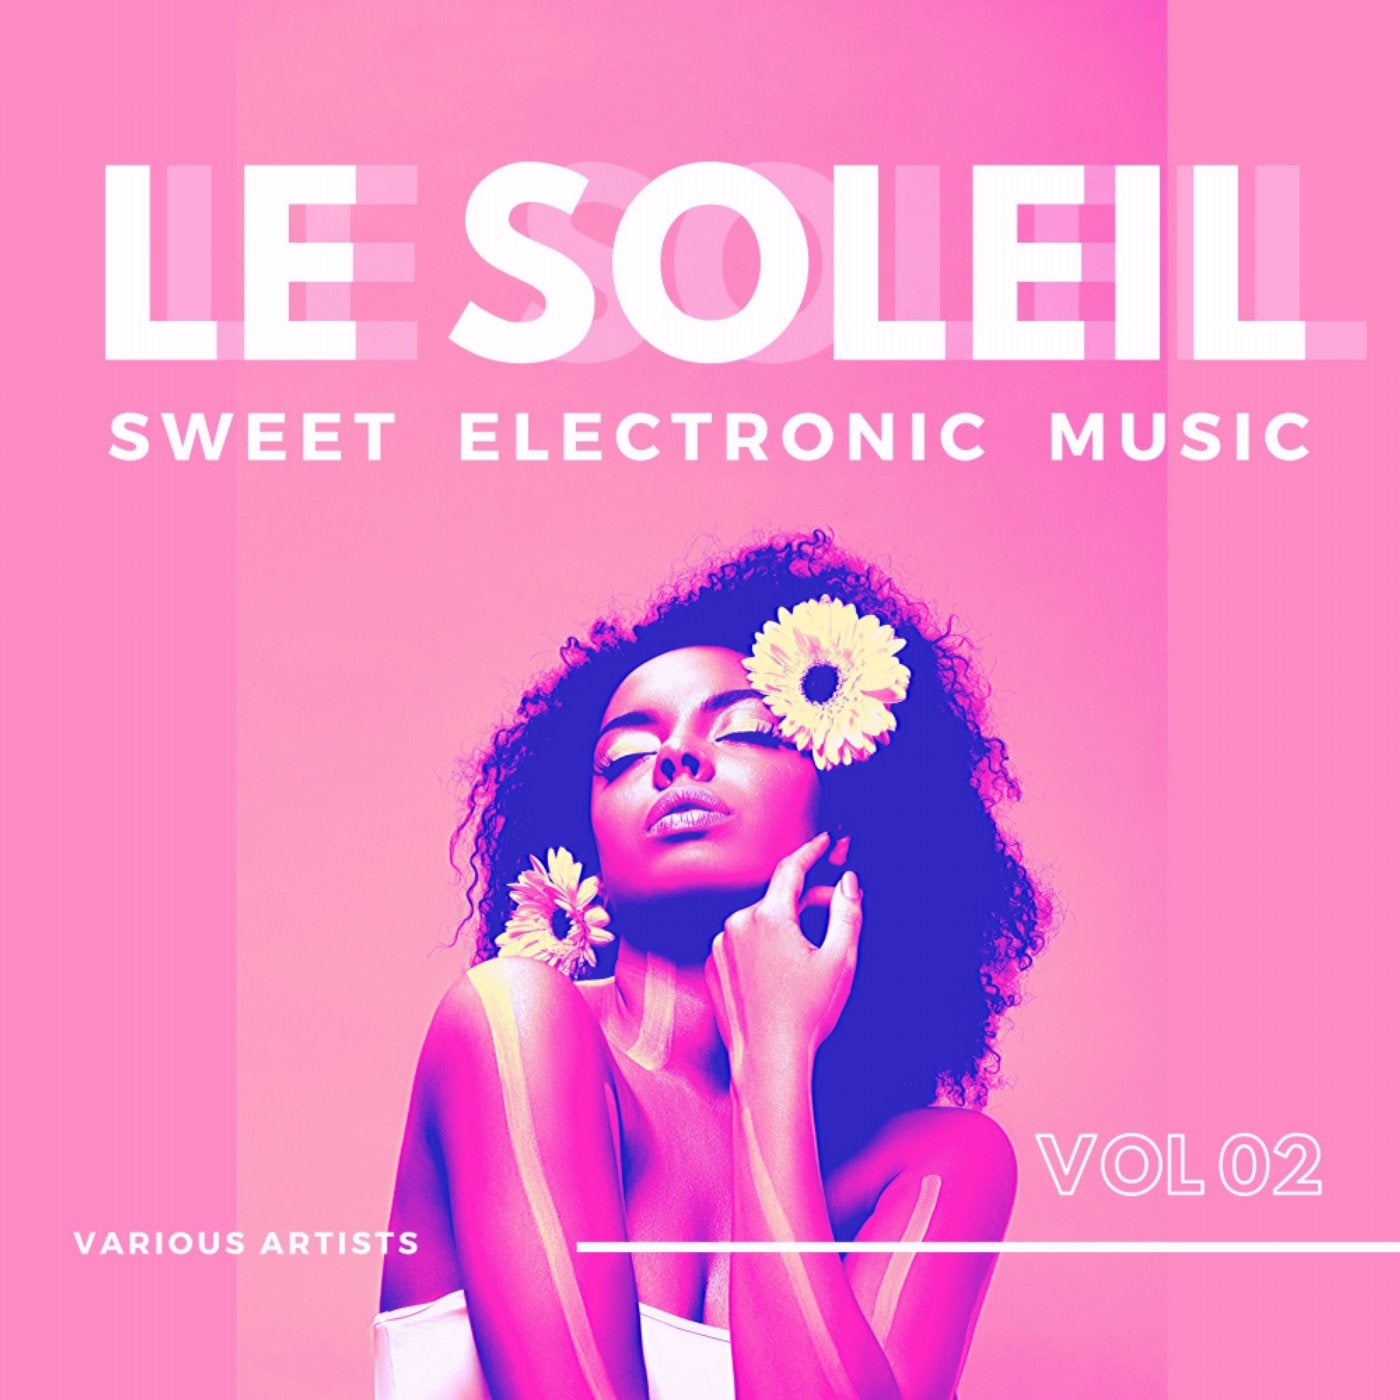 Le Soleil (Sweet Electronic Music), Vol. 2